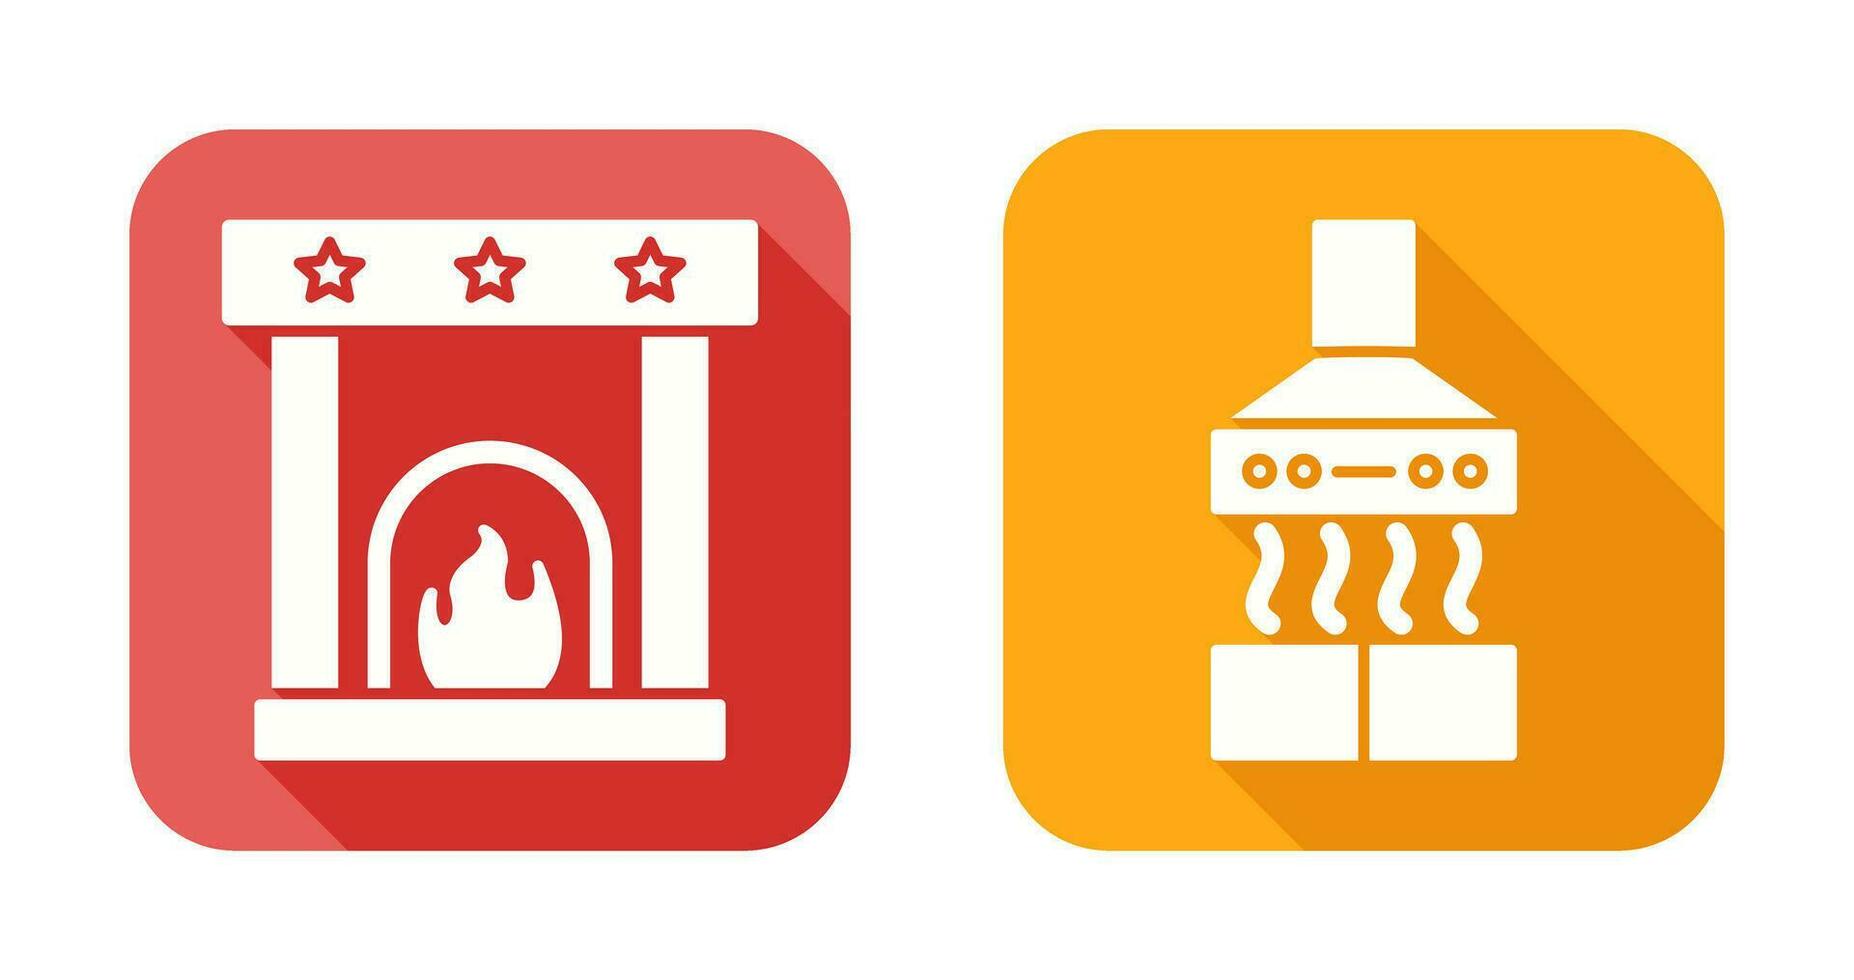 Fireplace and Extractor Hood Icon vector